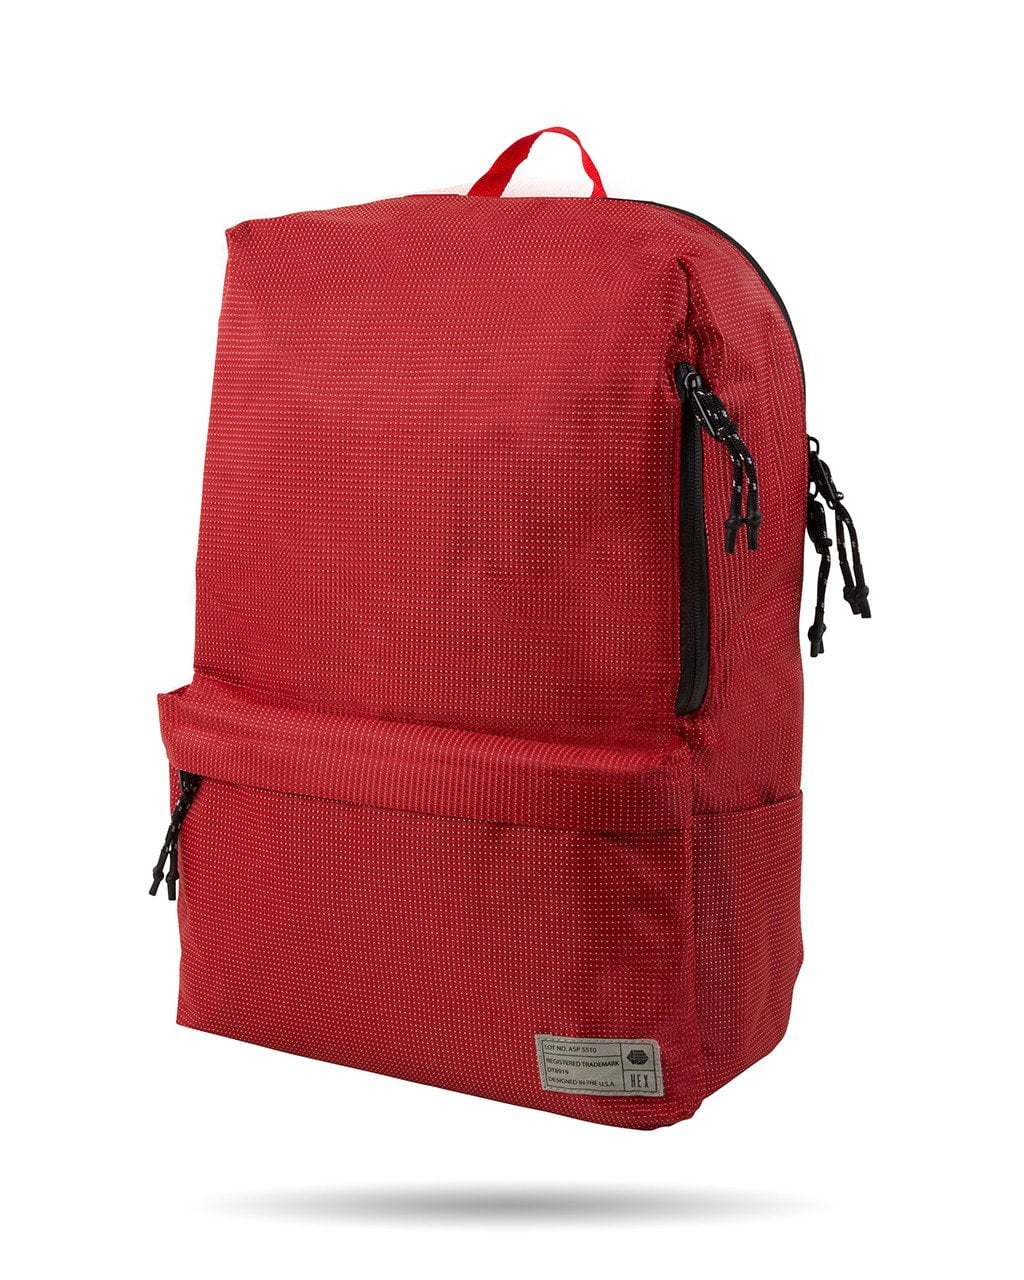 Hex Exile Backpack - Red Dot